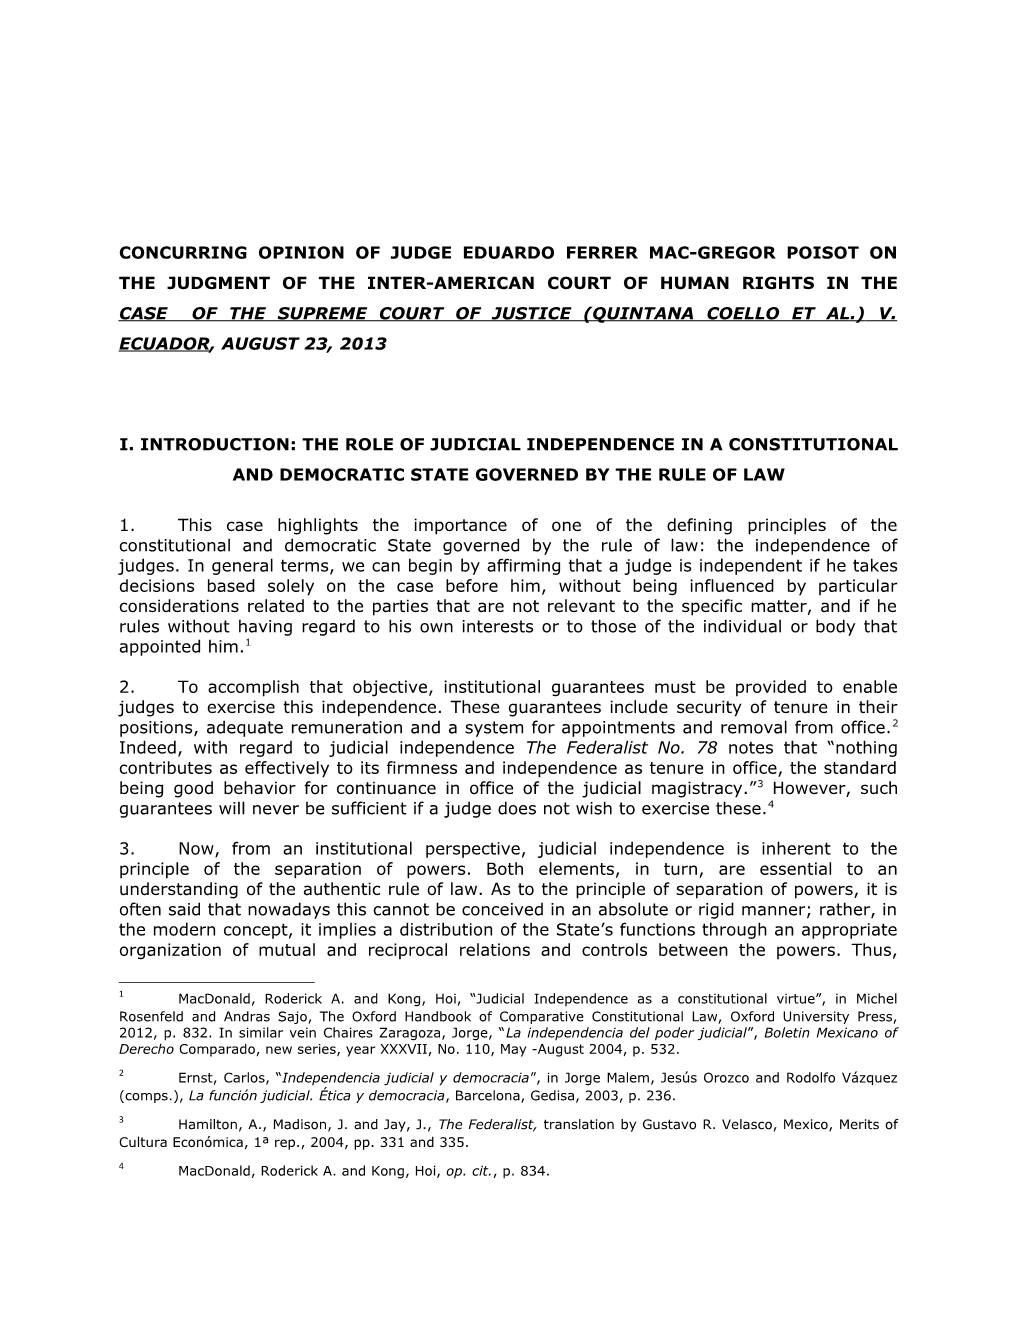 Concurring Opinion of Judge Eduardo Ferrer Mac-Gregor Poisot to the Judgment of The